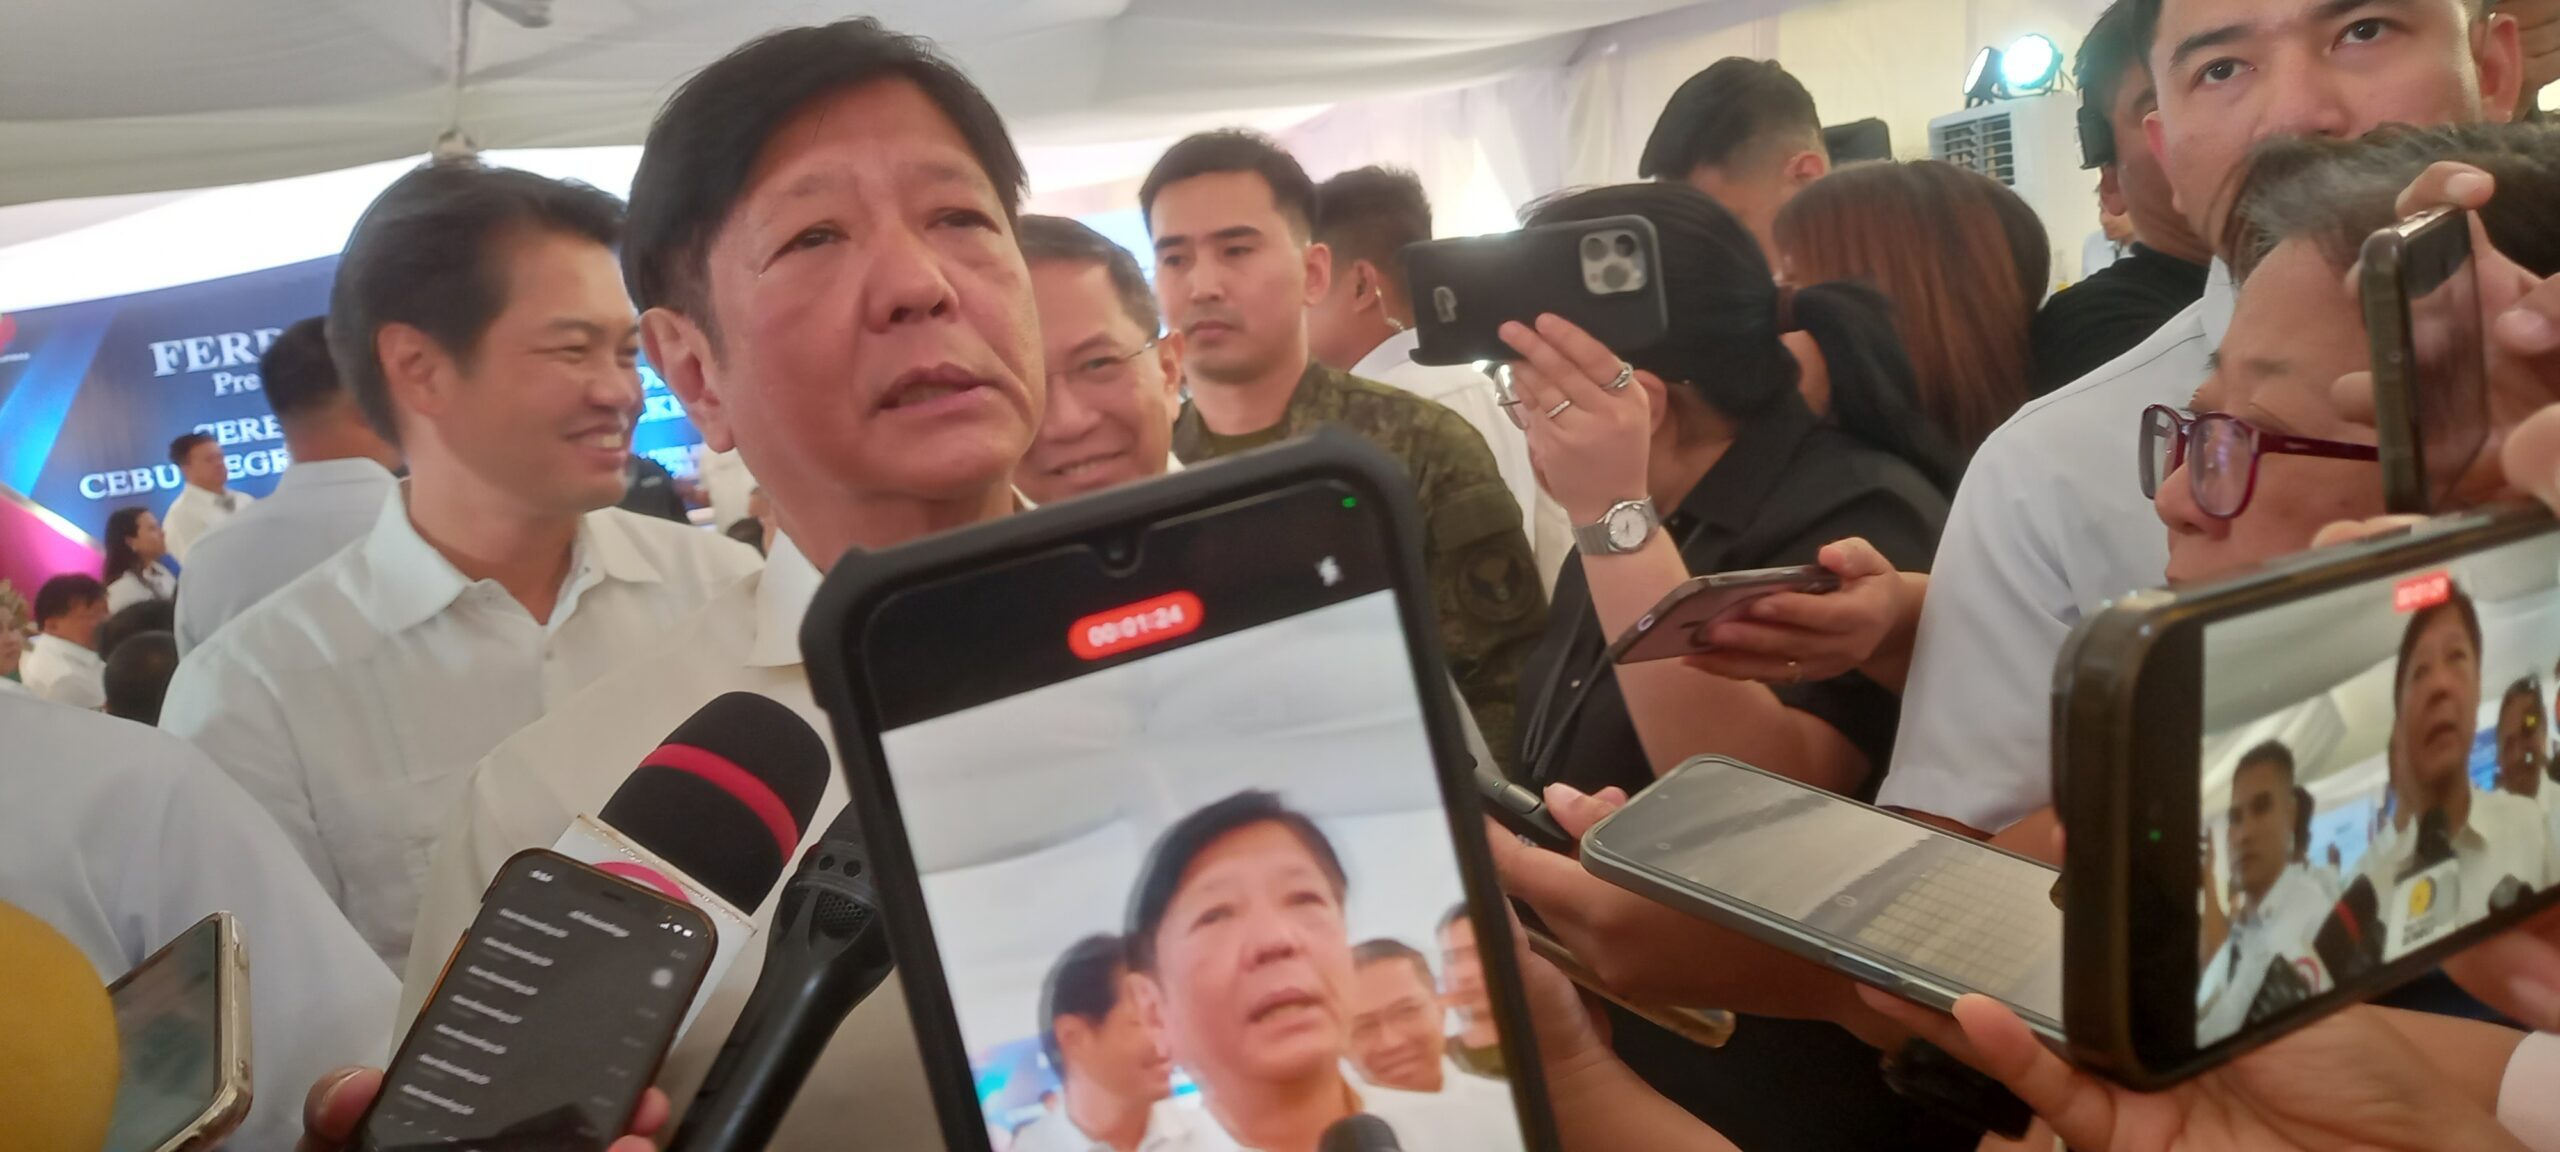 Marcos assures Teves of ‘compassion, fairness, security’